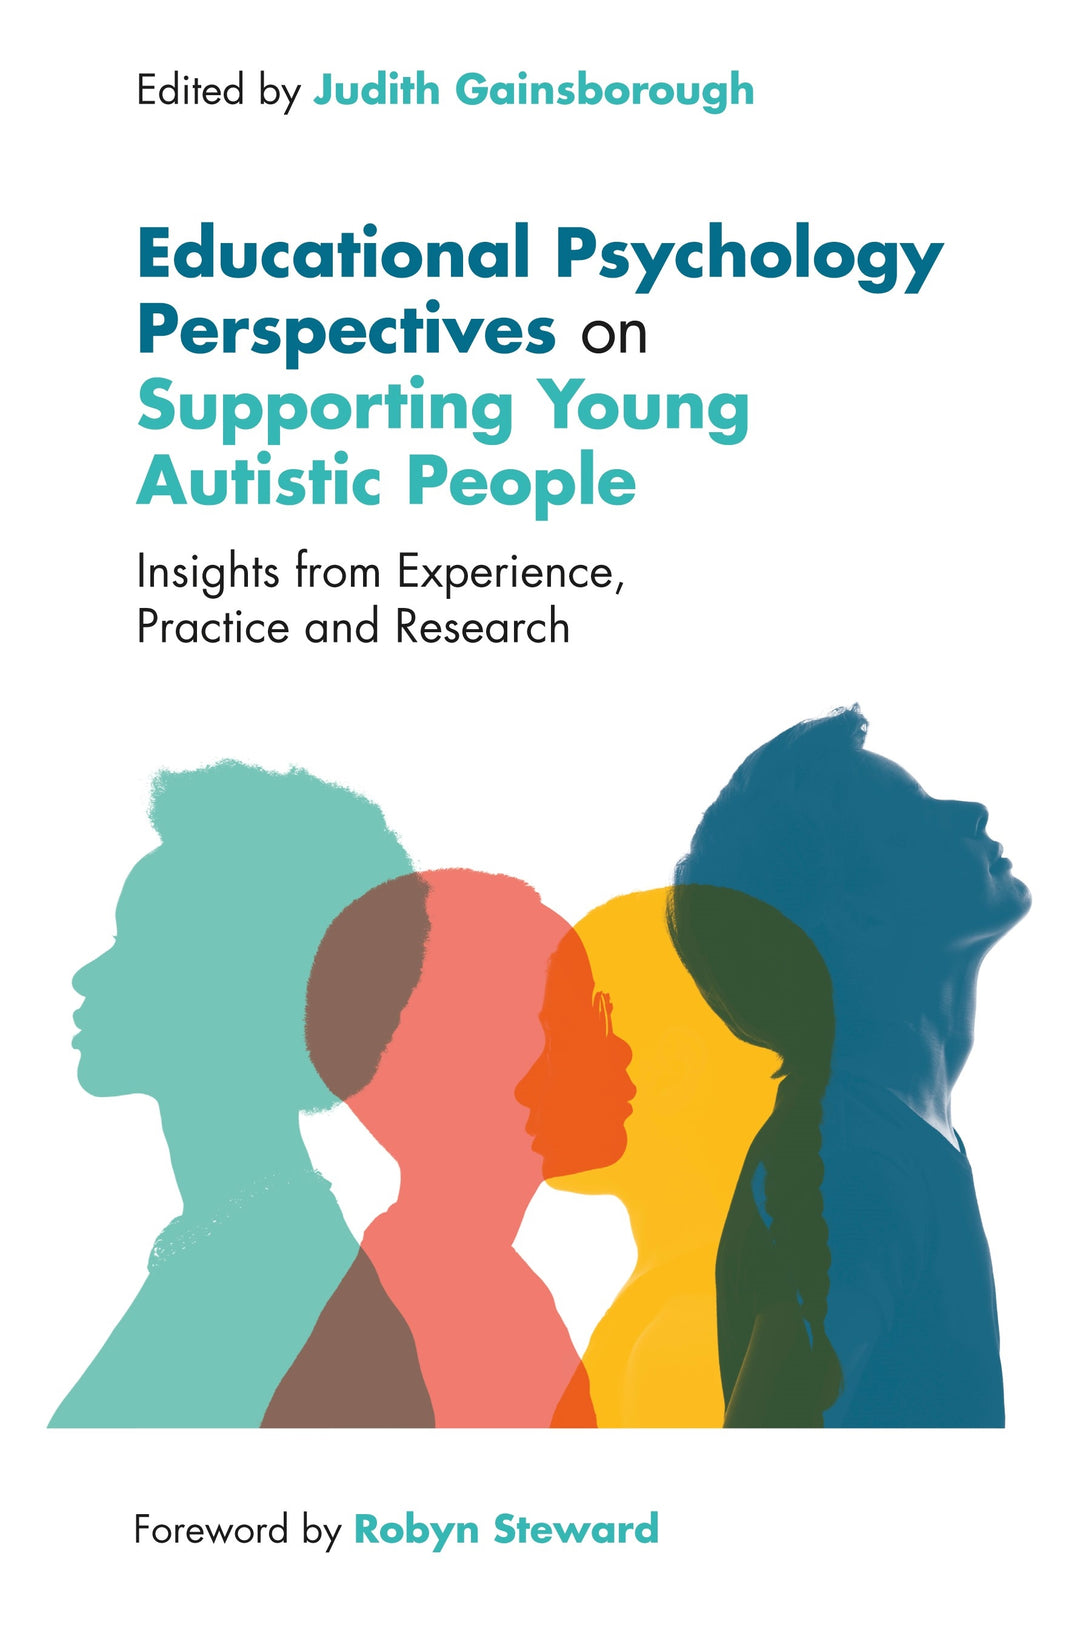 Educational Psychology Perspectives on Supporting Young Autistic People by Judith Gainsborough, No Author Listed, Robyn Steward